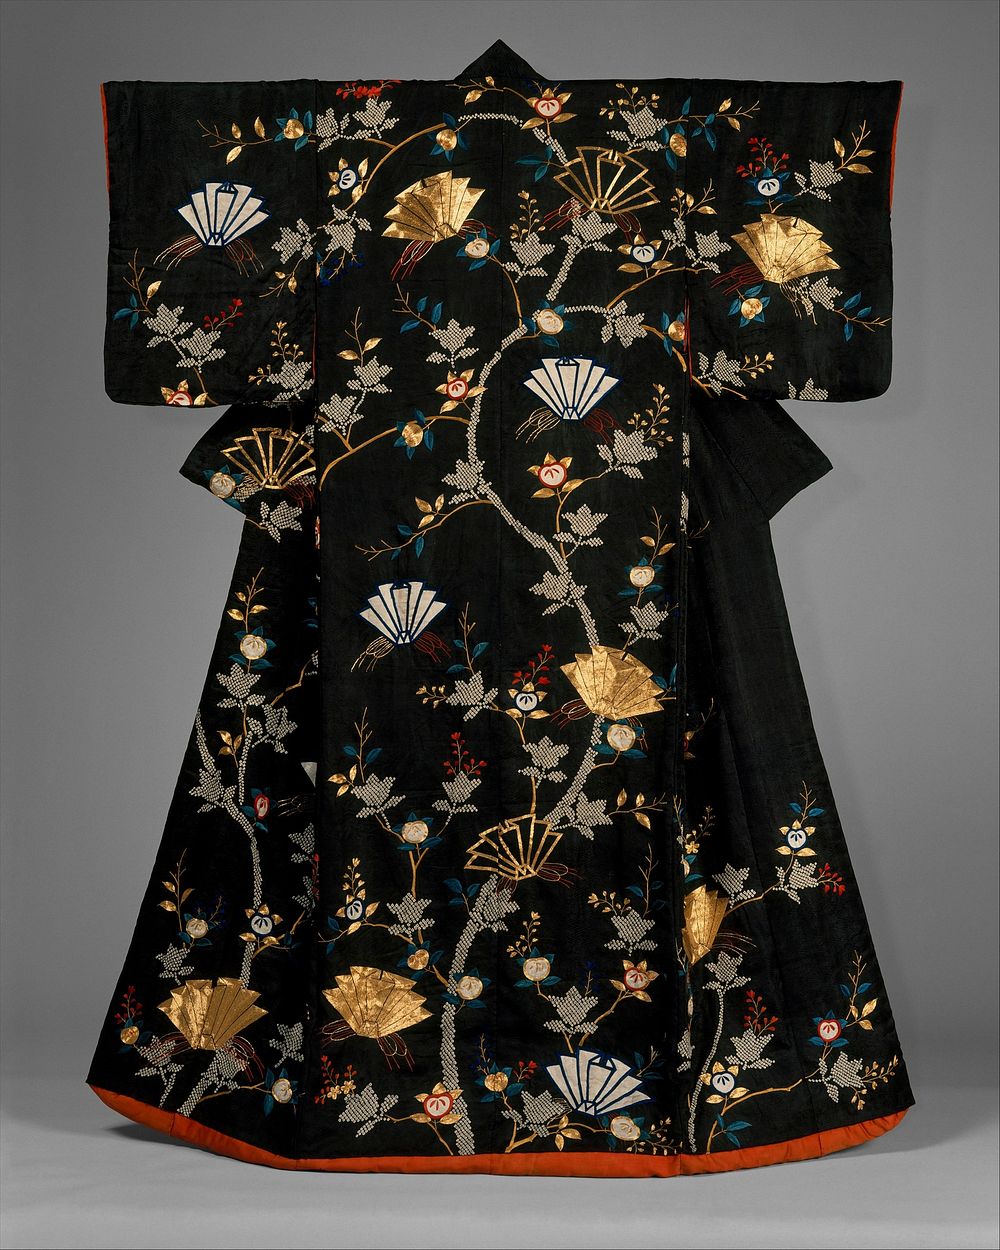 Outer Robe (Uchikake) with Mandarin Oranges and Folded-Paper Butterflies